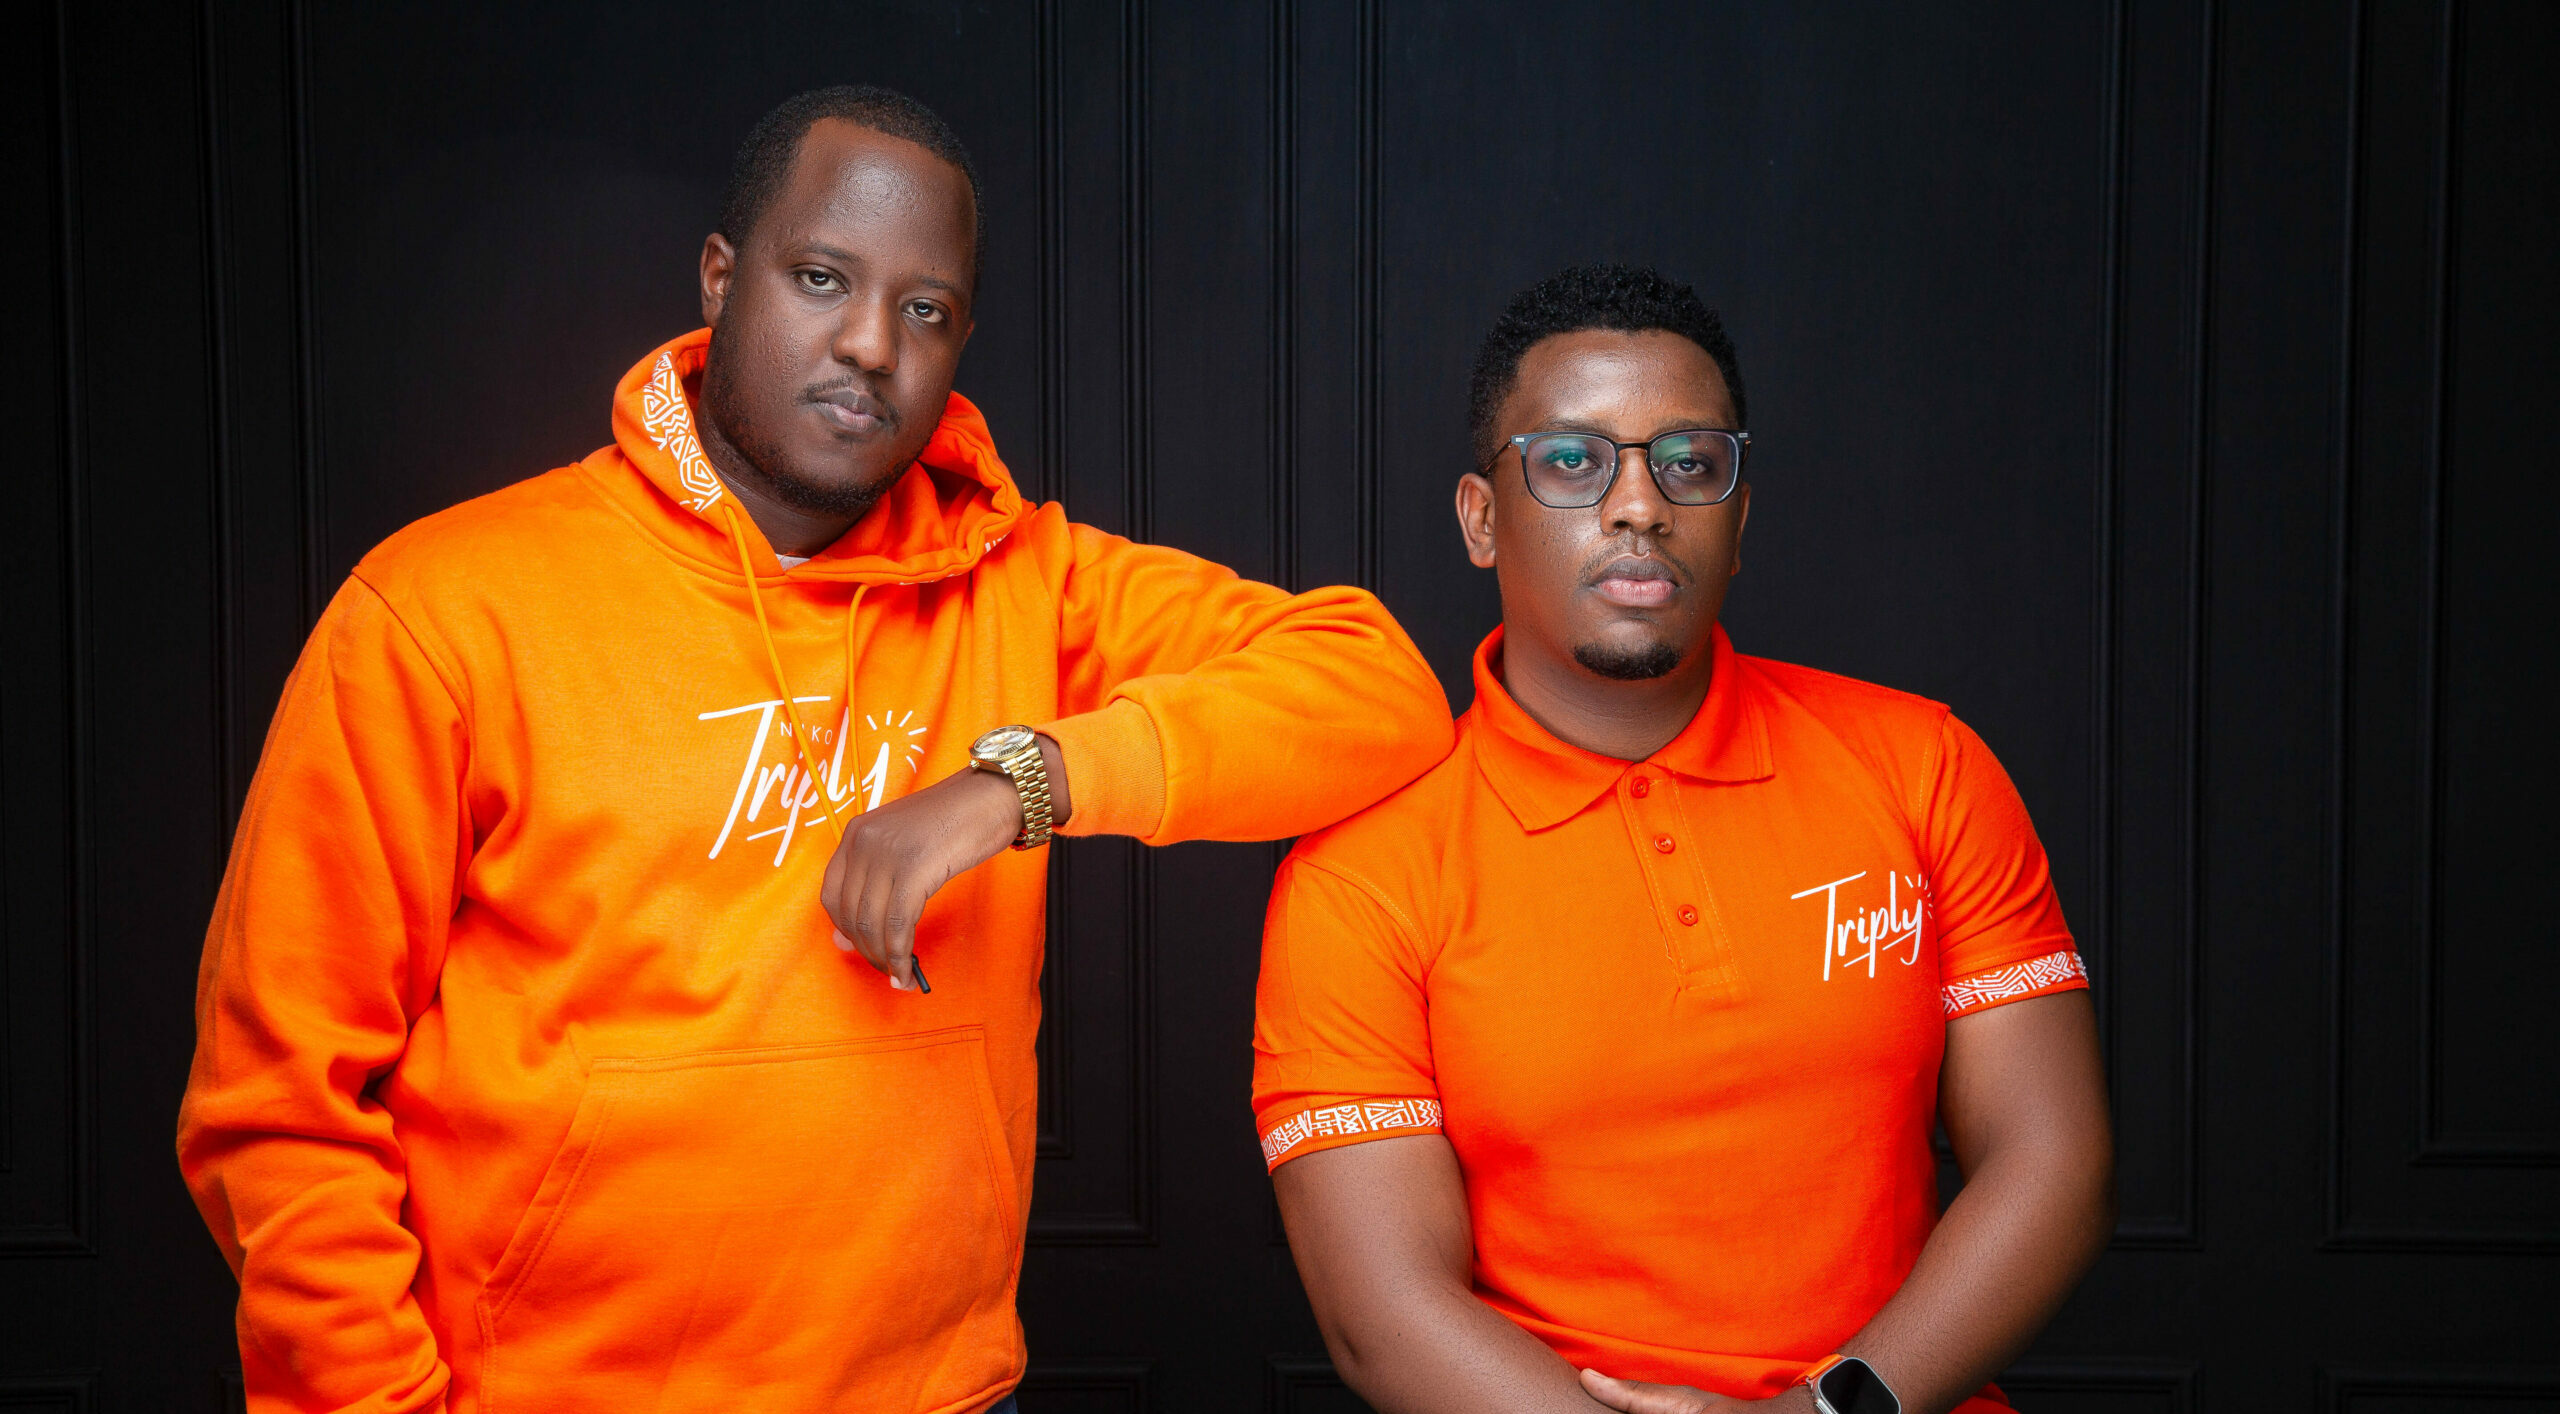 Kenyan Travel Tech Startup Triply.co Secures $500,000 Investment From Y Combinator